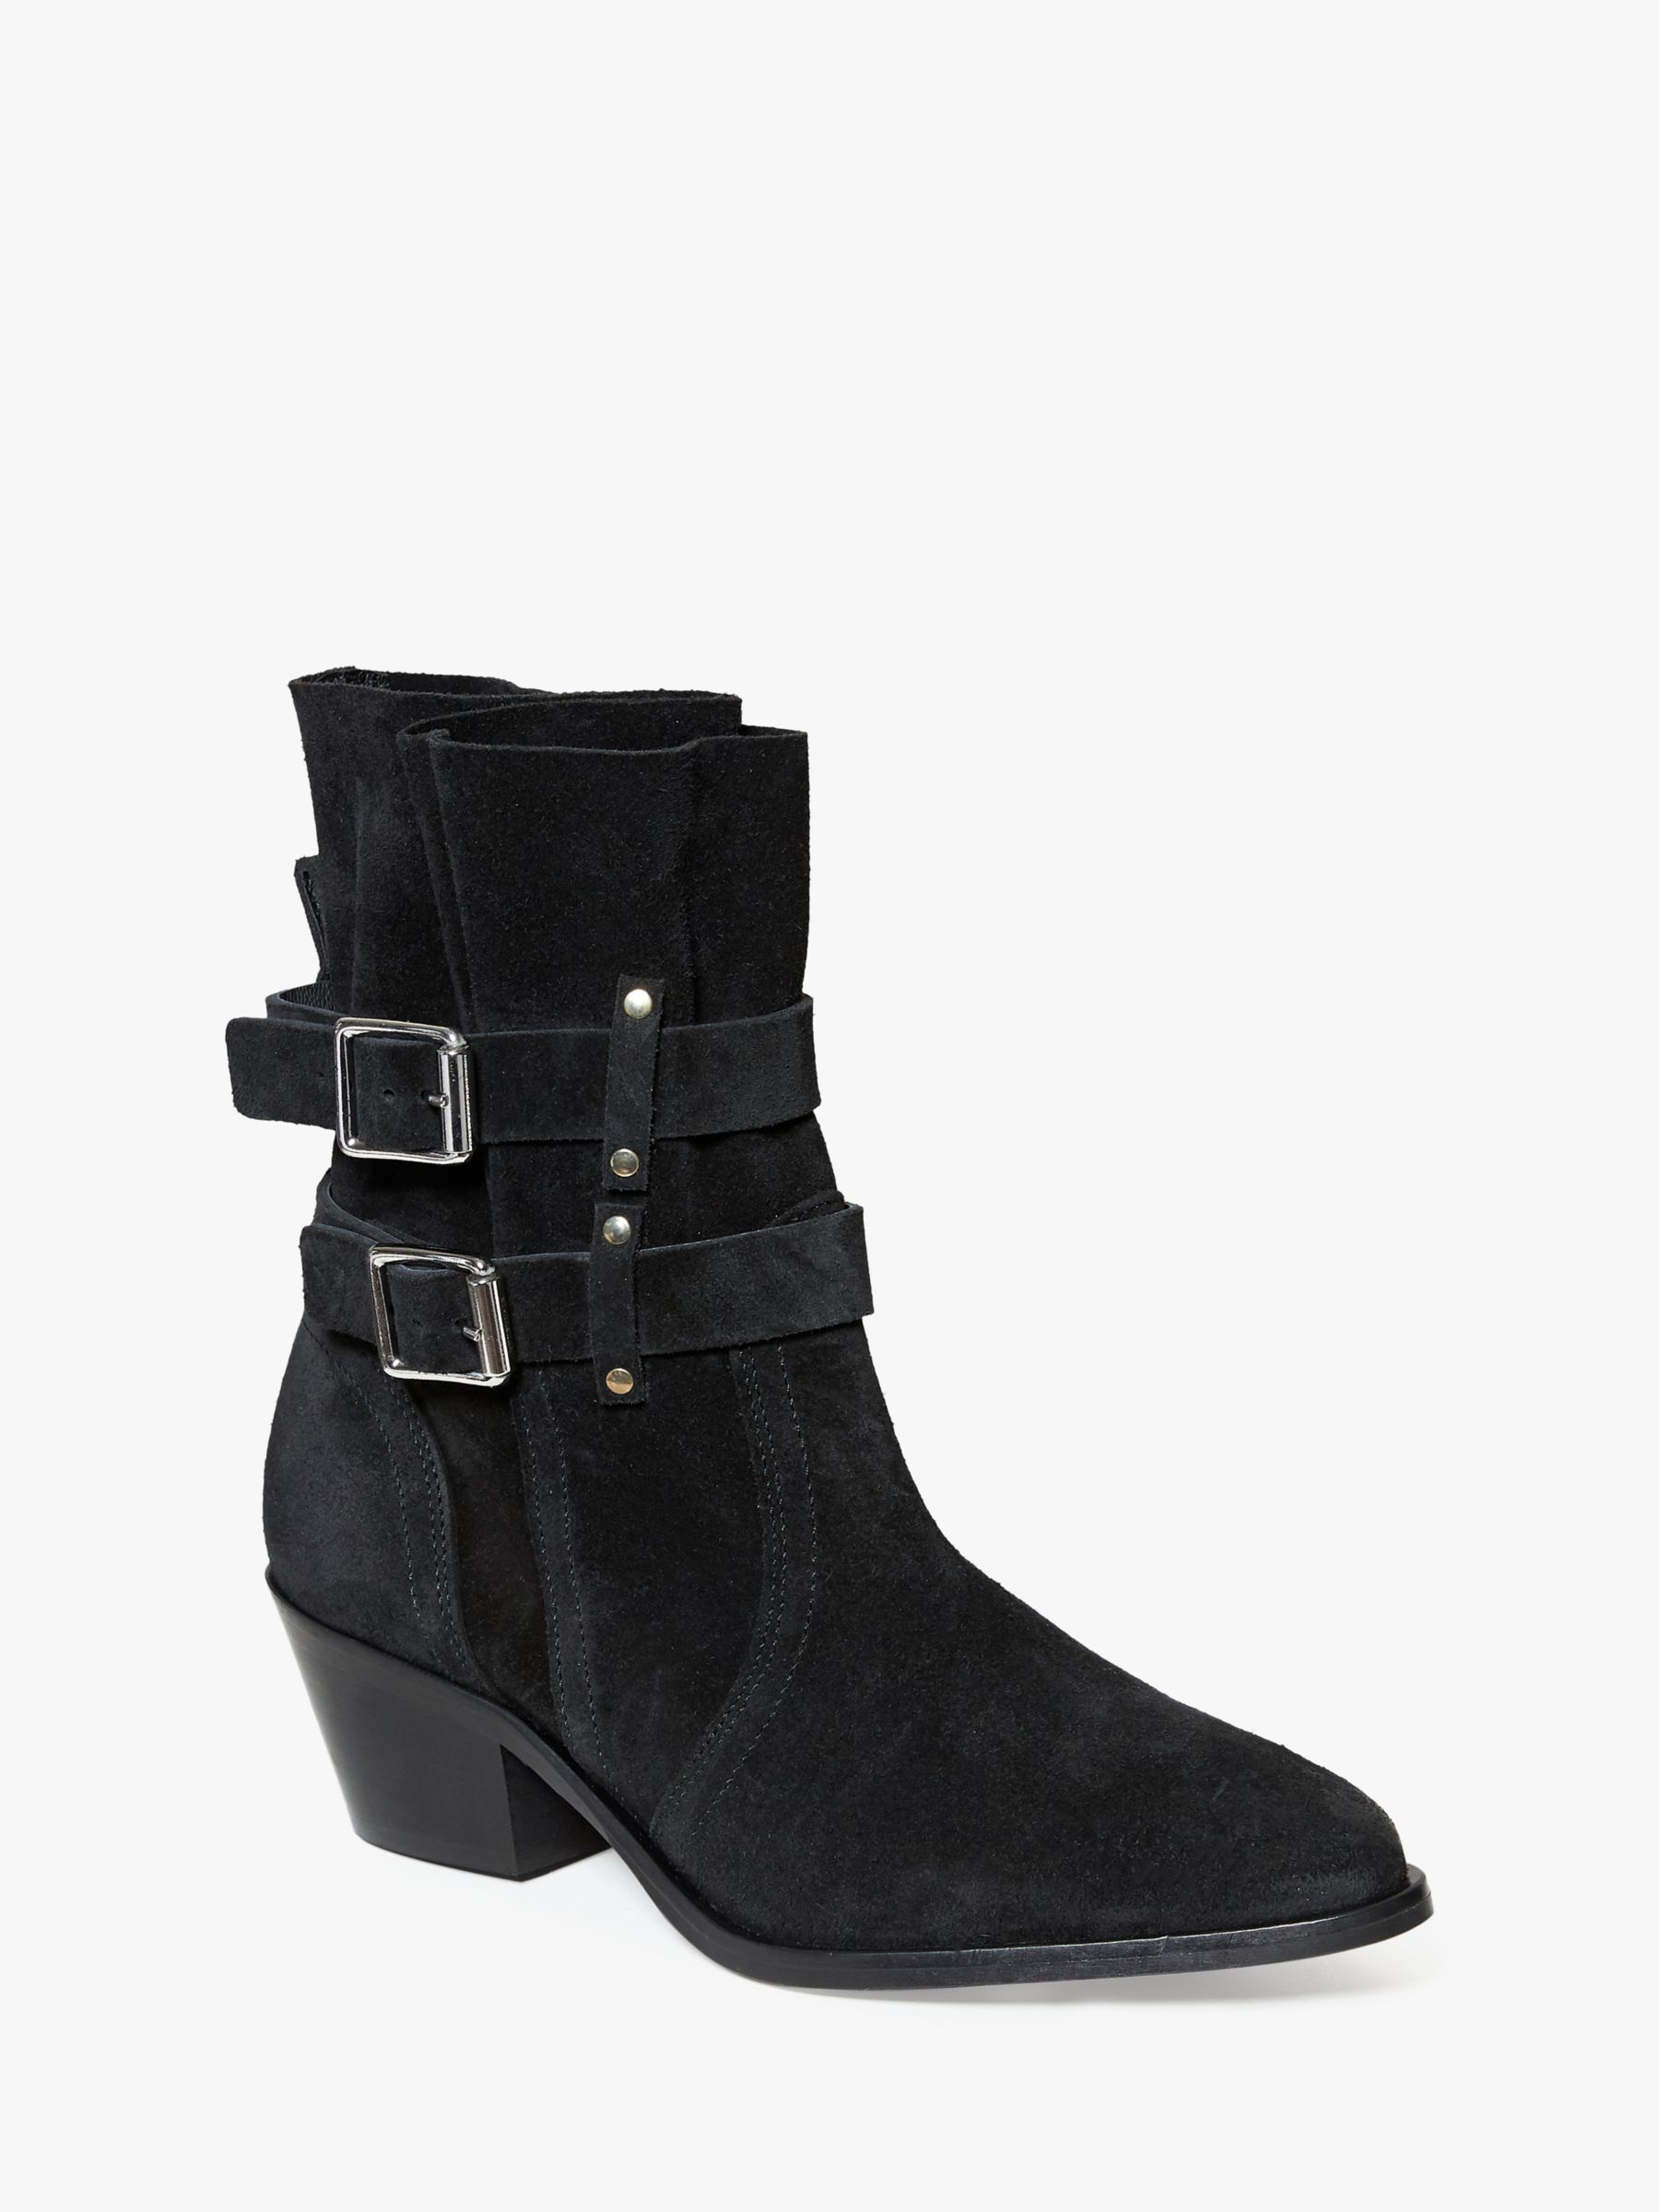 AllSaints Harriet Suede Buckled Ankle Boots, Black at John Lewis & Partners